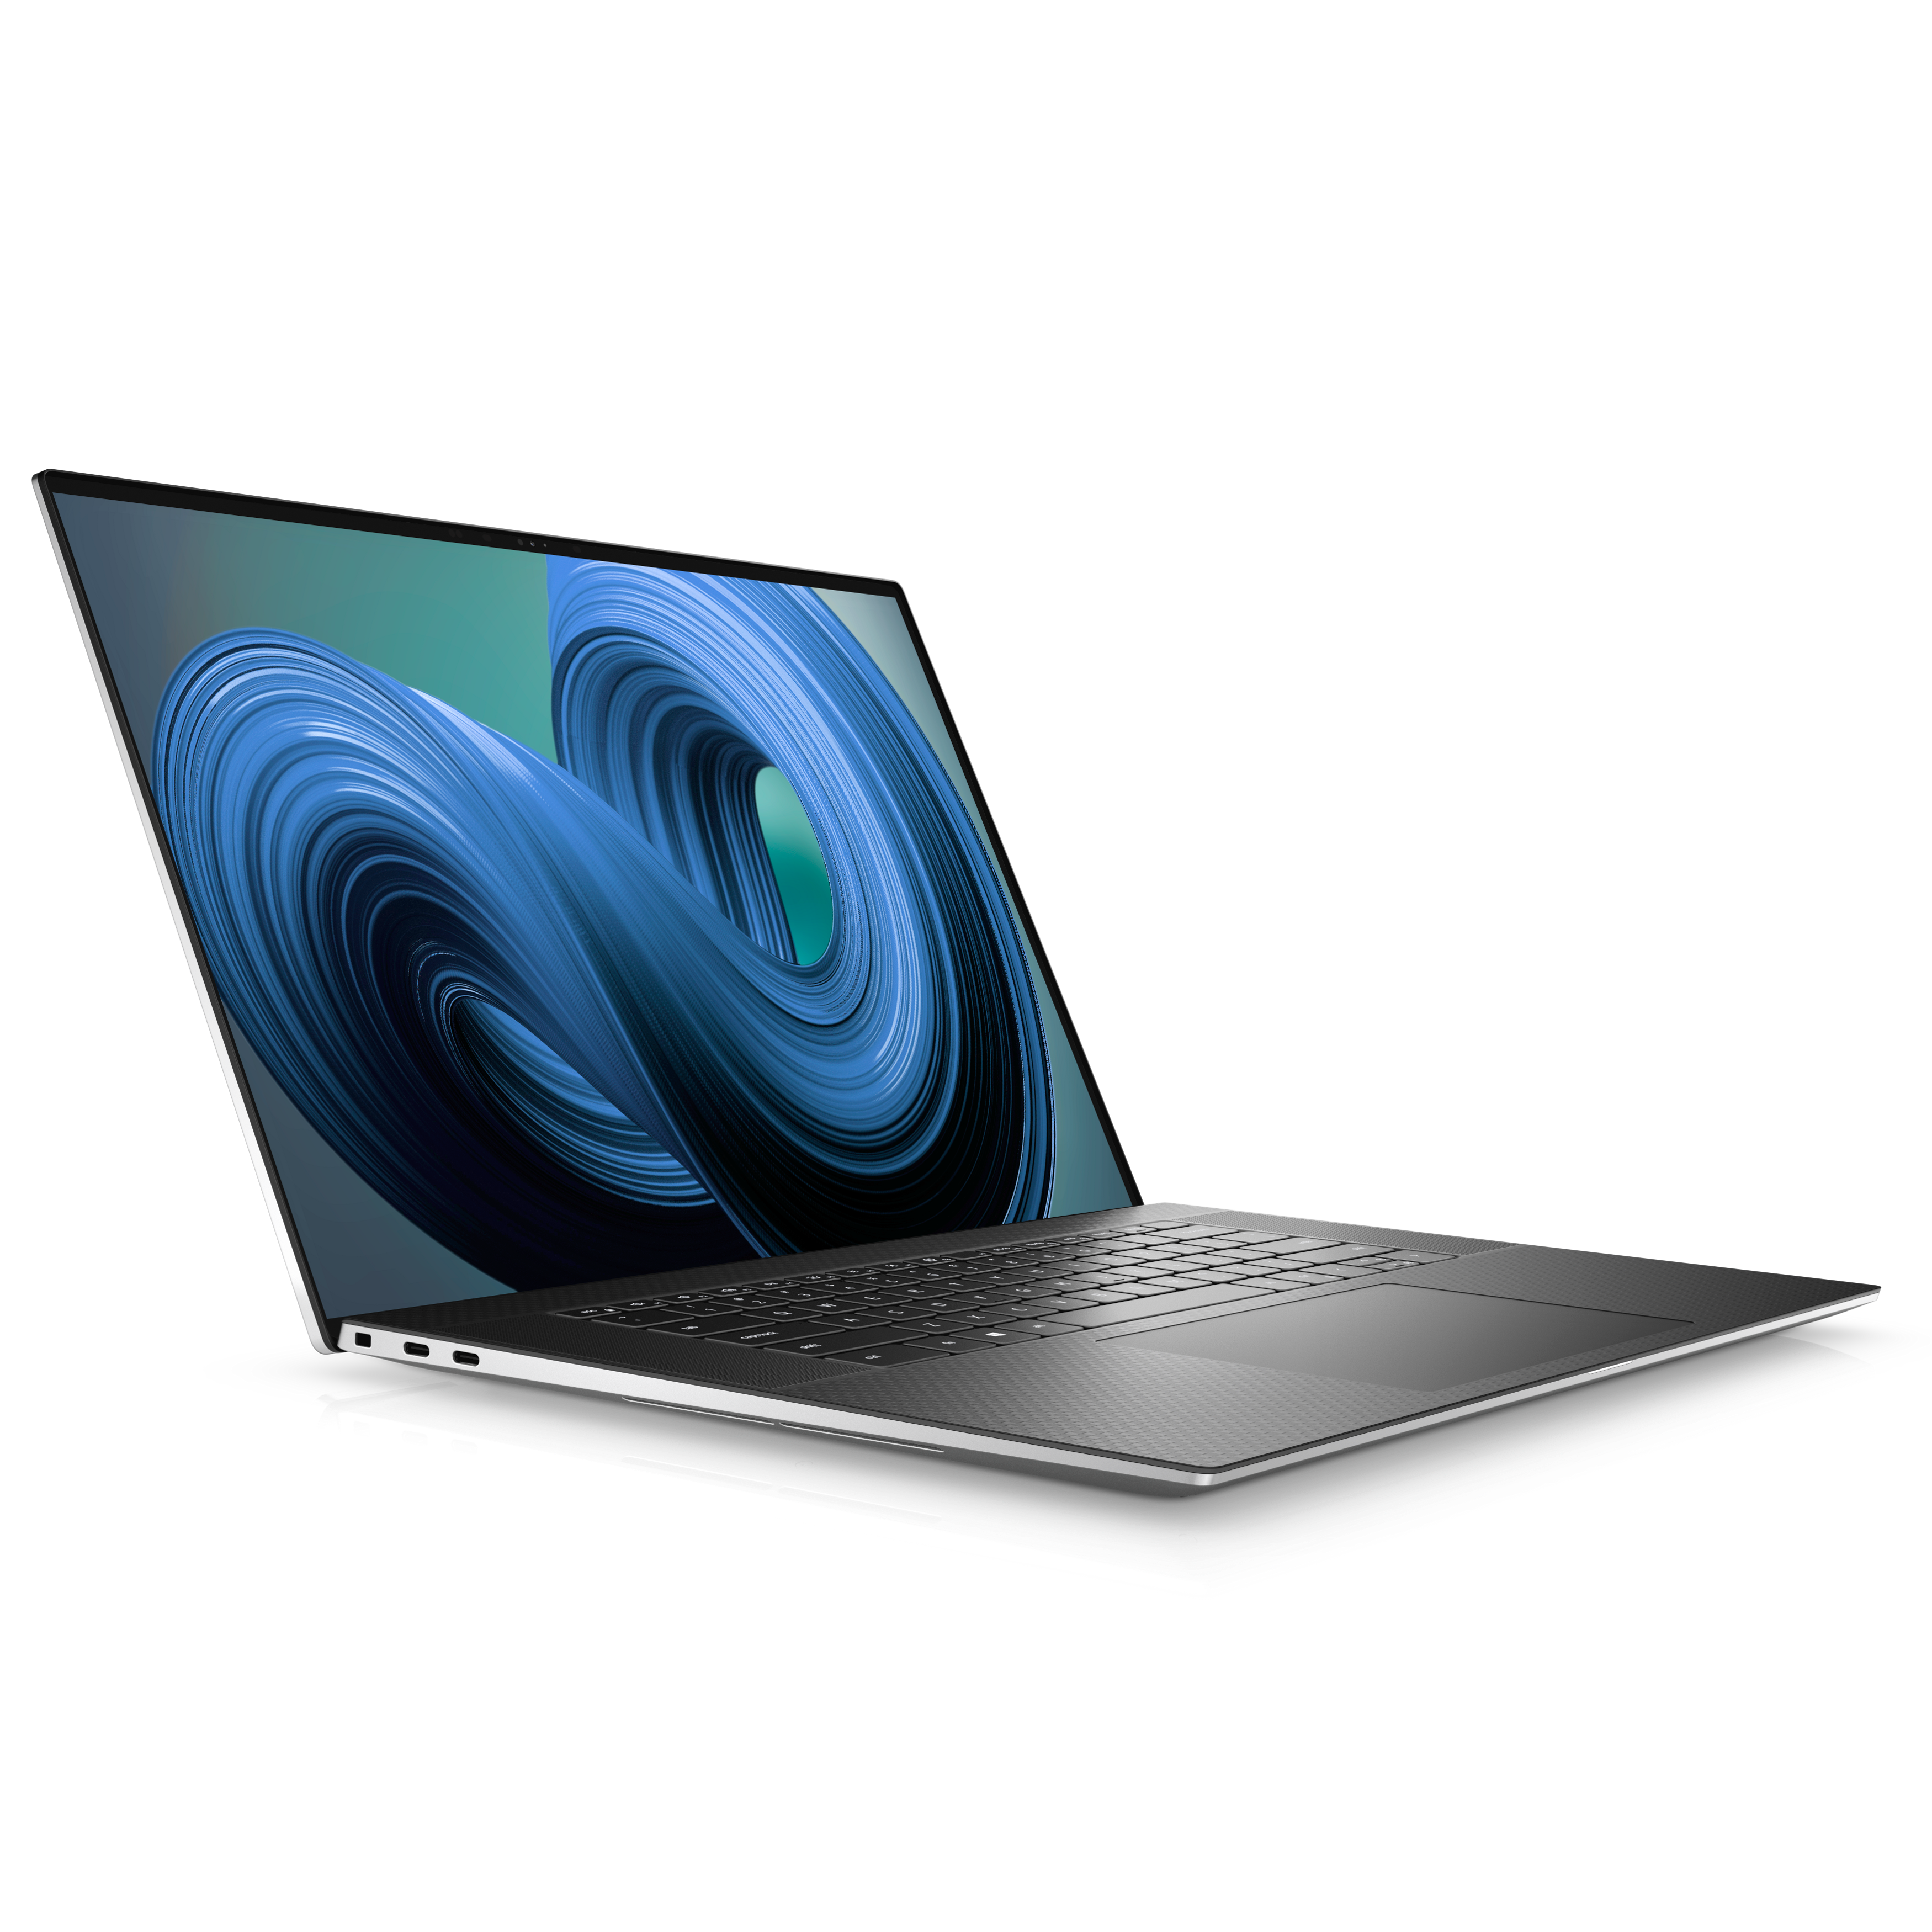 Angled front view of the Dell XPS 17 laptop facing right